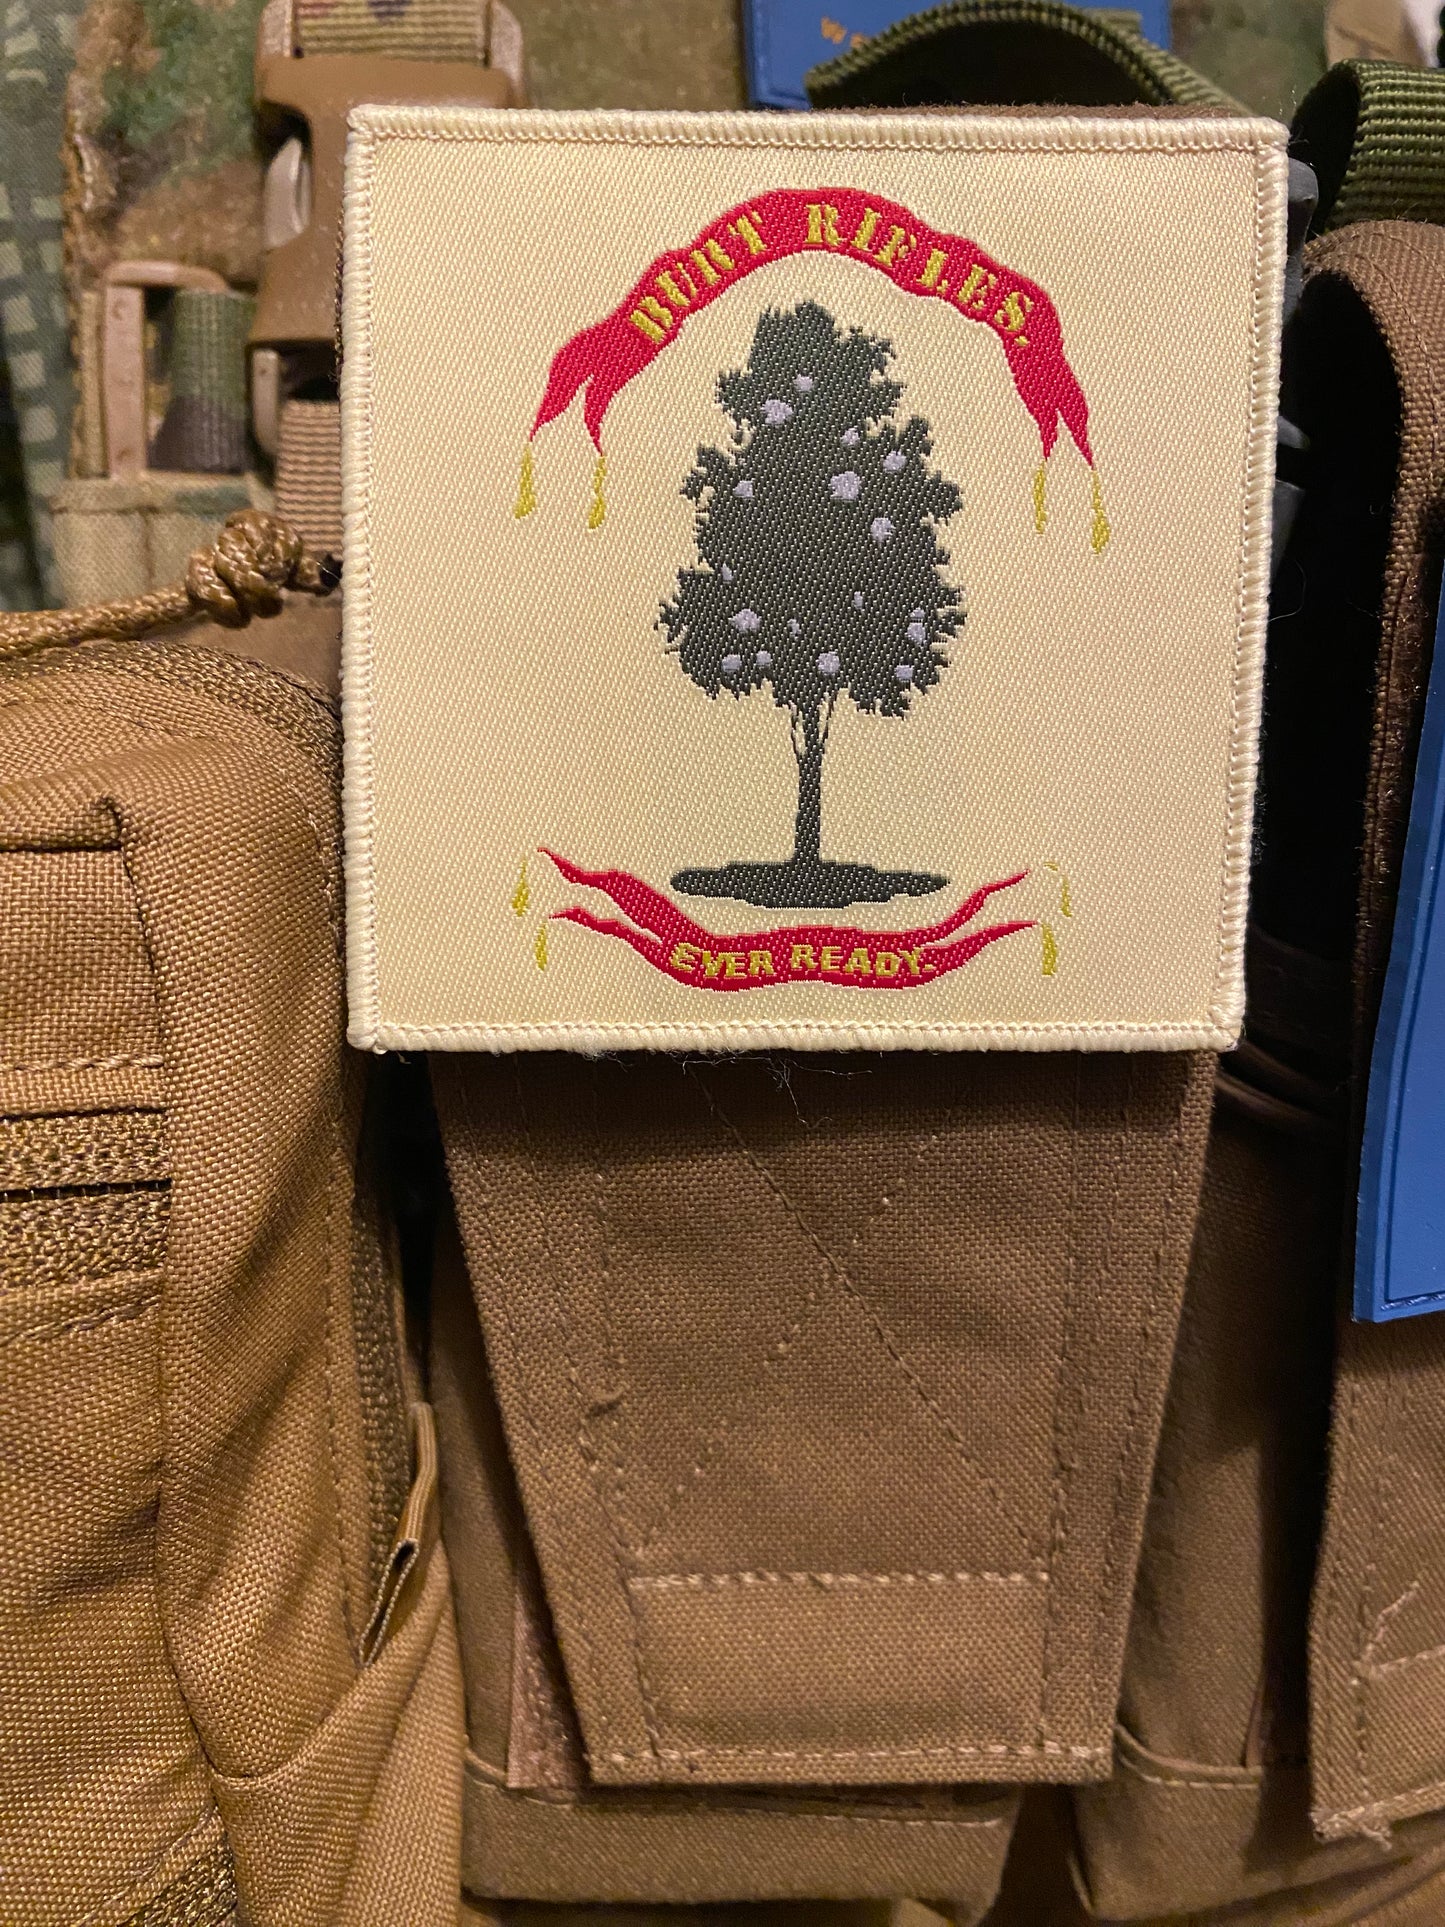 "Ever Ready" 18th Mississippi Morale Patch